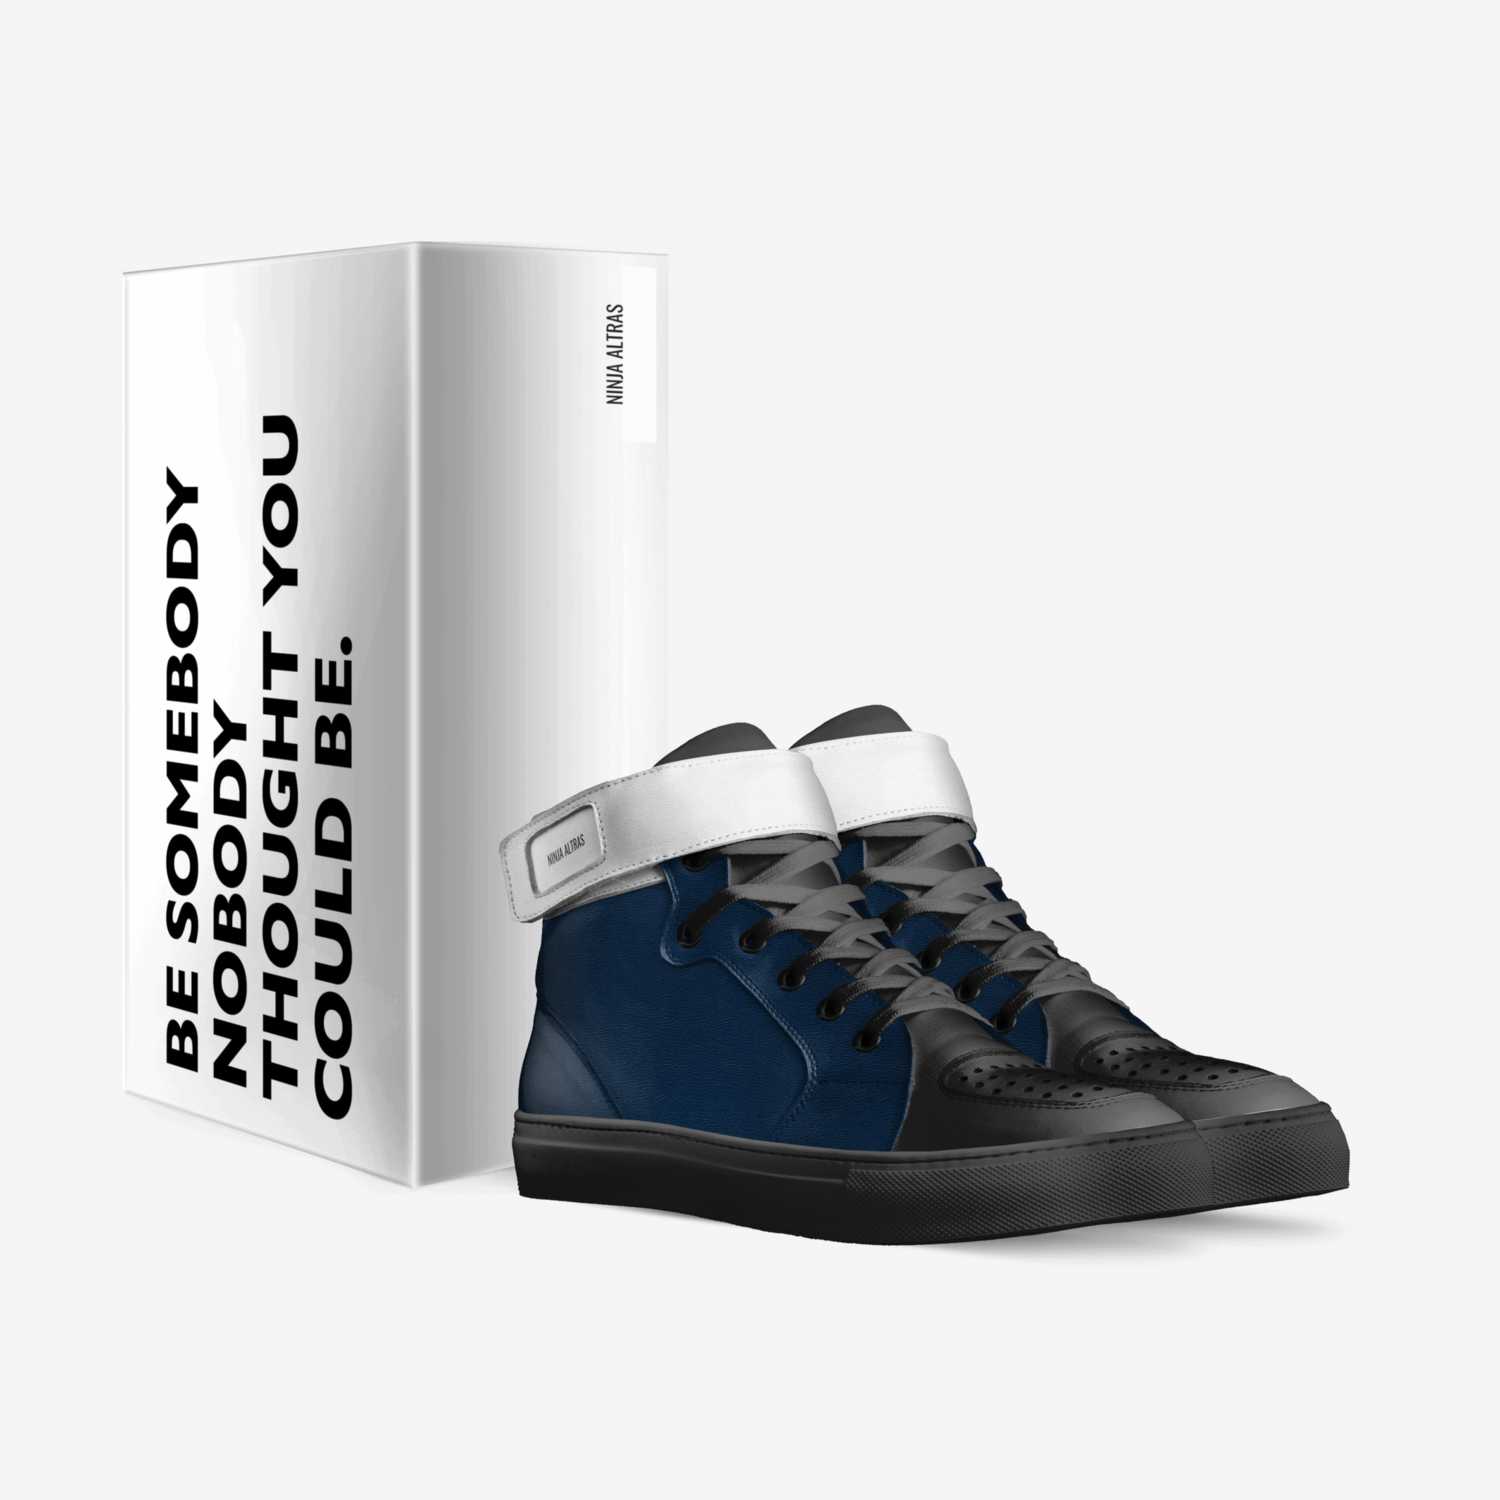 ninja altras custom made in Italy shoes by Jbandy K9 | Box view